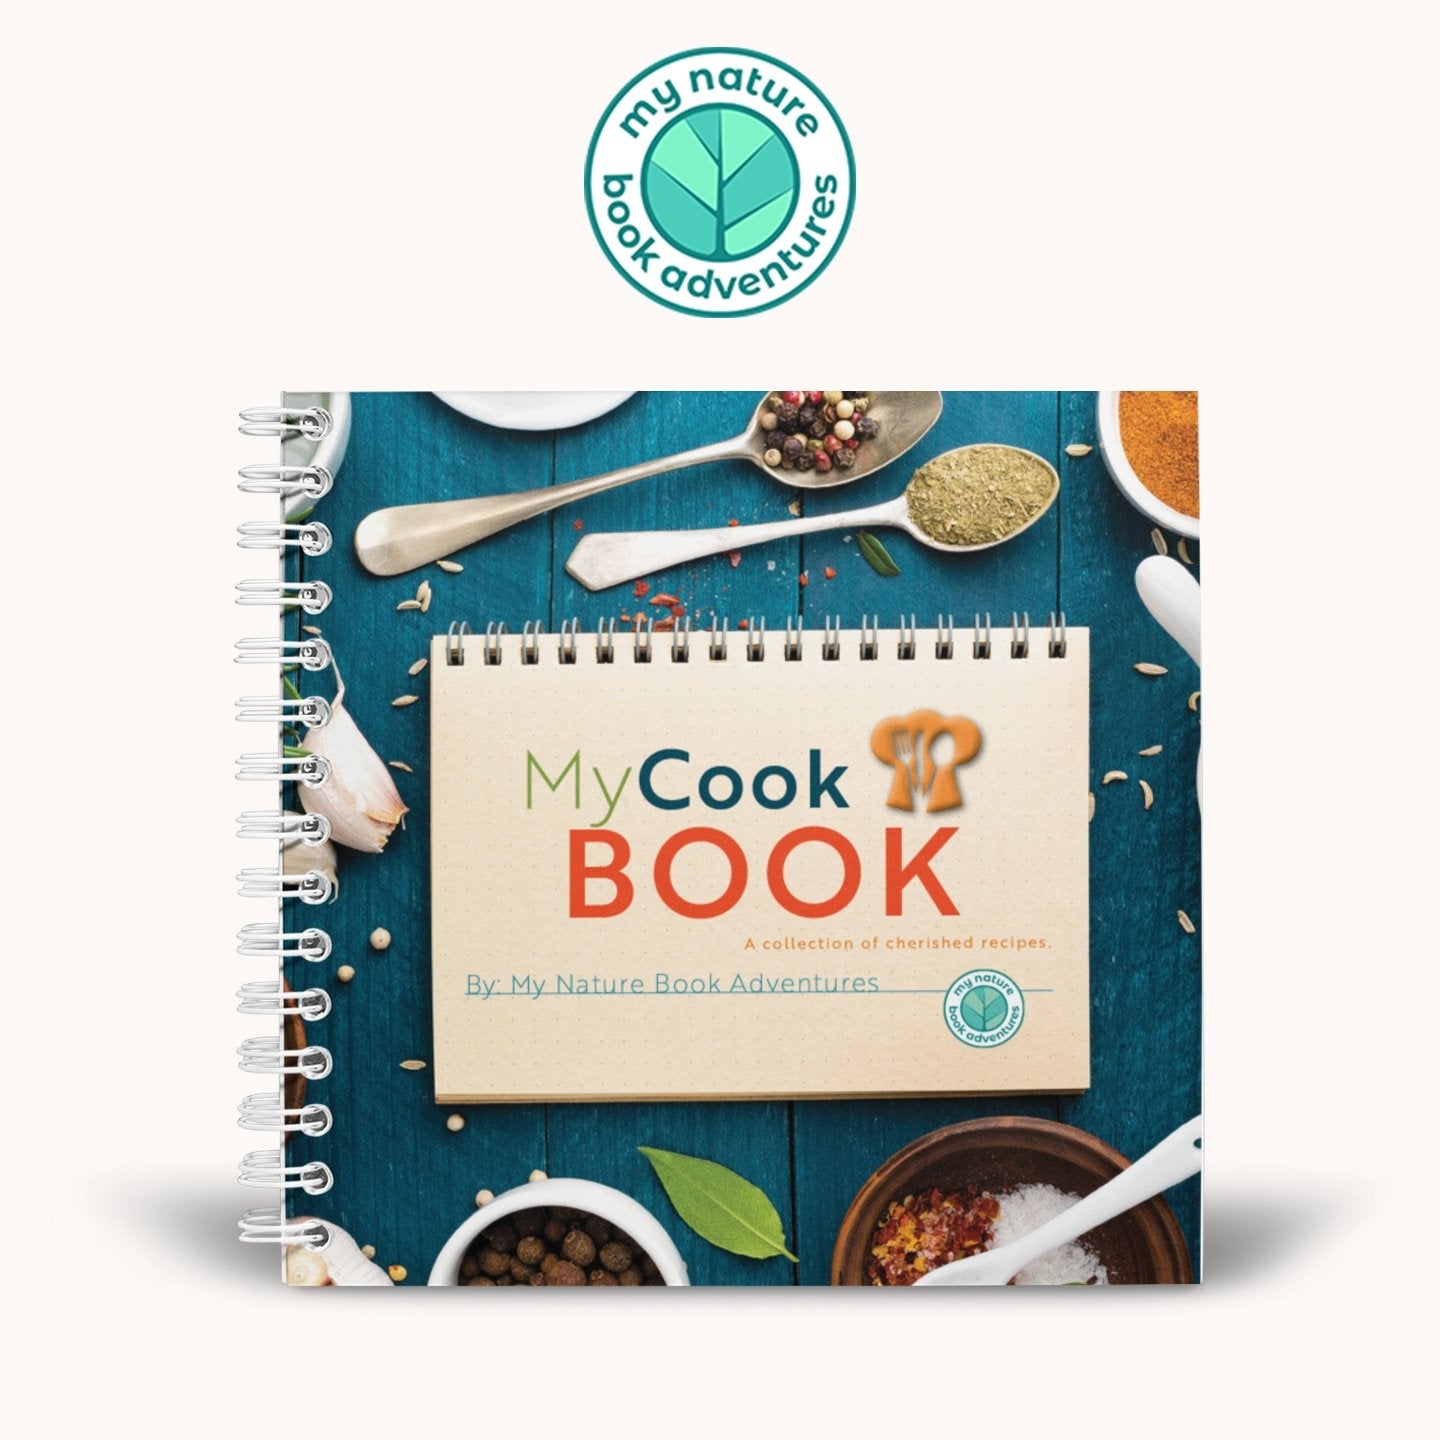 Nelson-Atkins@Home: Create Your Own Recipe Book